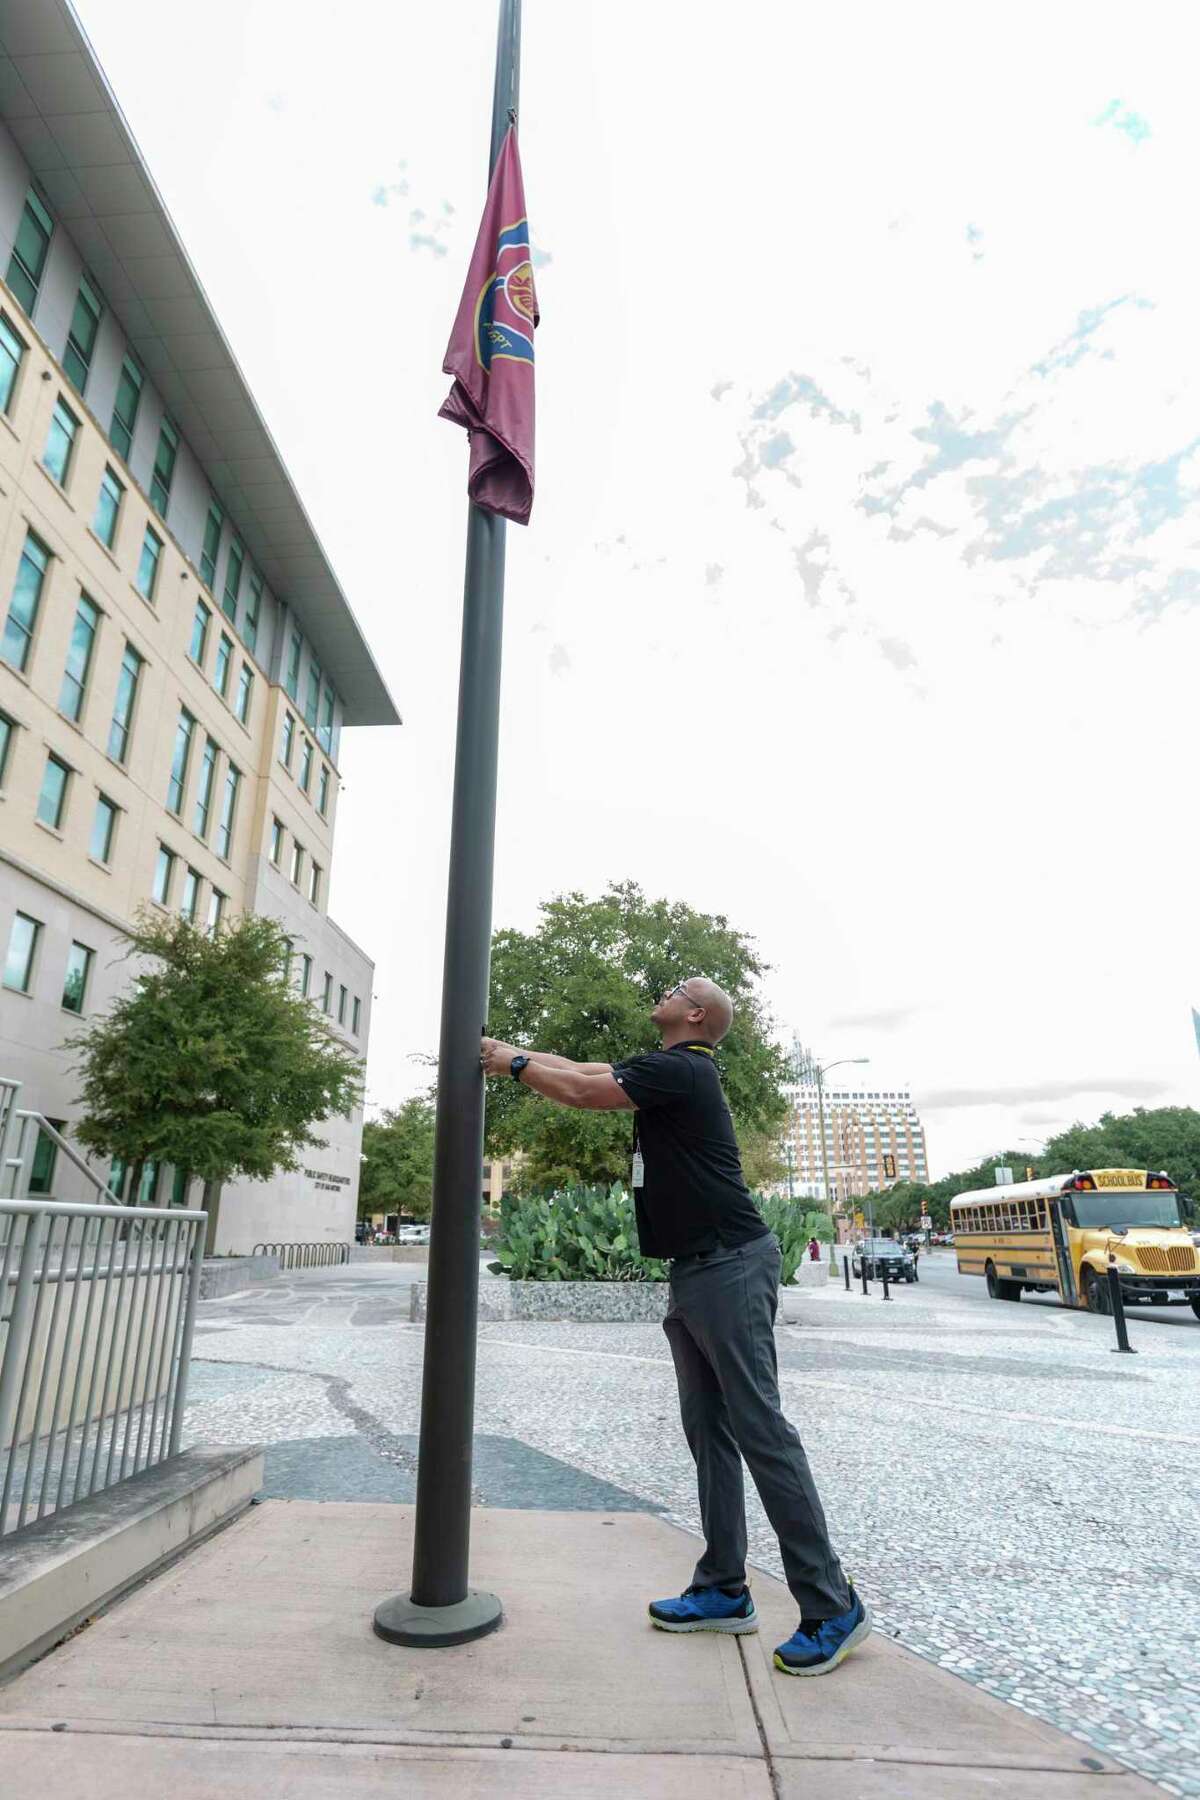 San Antonio Police Department employee Kevin Wilkinson lowers the fire department flag Tuesday, Oct. 15, 2019, in front of Public Safety Headquarters after it was announced Station 1 firefighter Greg Garza had been killed while on a call earlier in the day. Garza had been with the fire department for 17 years.